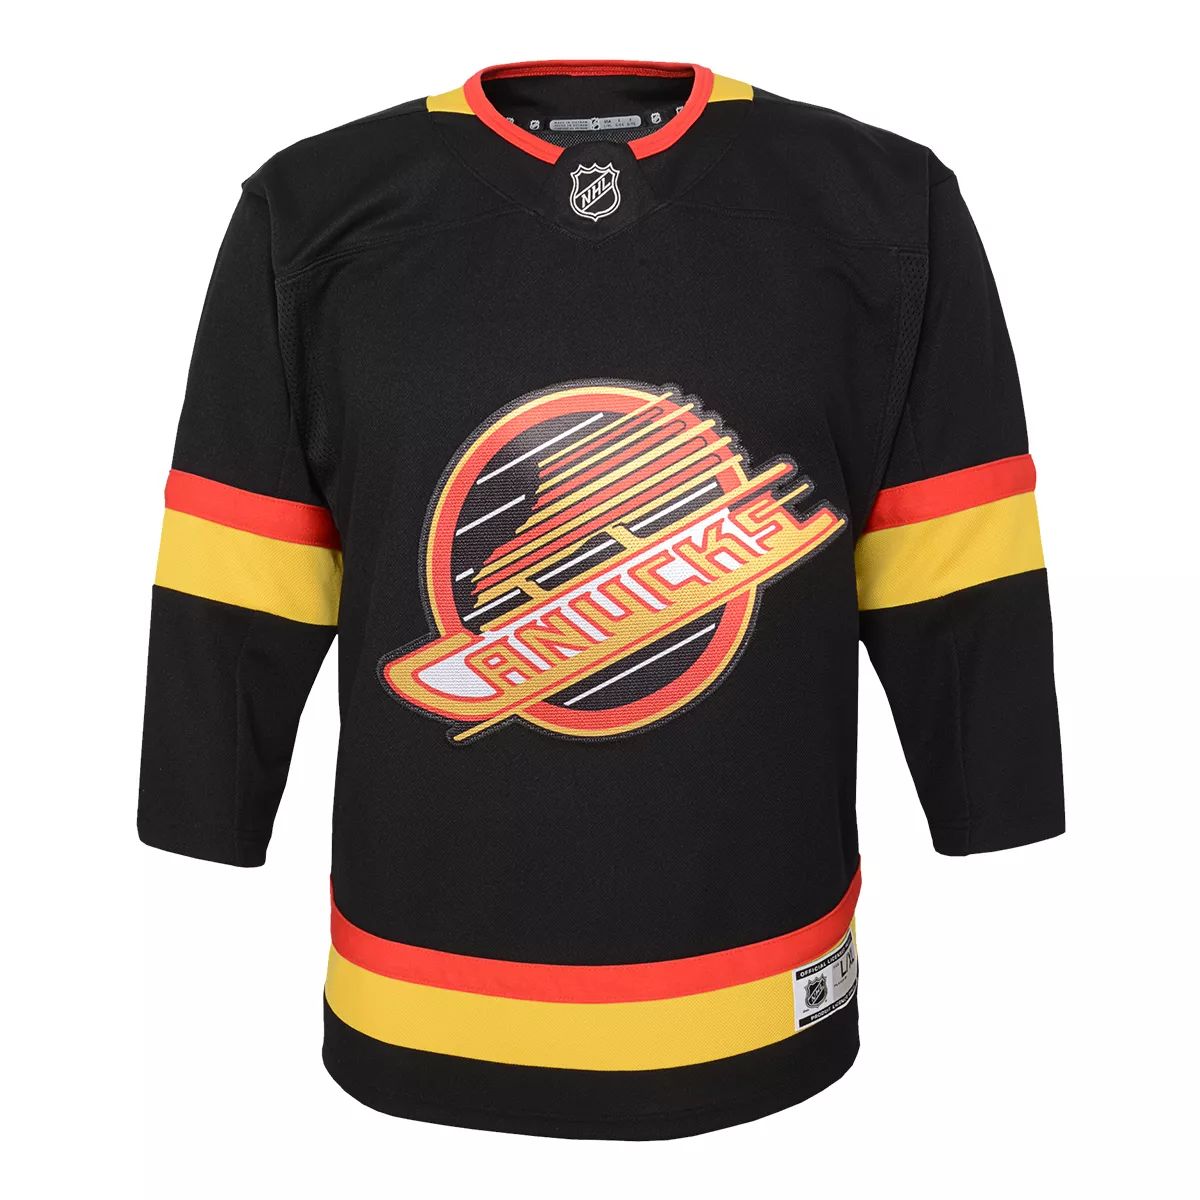 Outerstuff Youth NHL Replica Jersey-Away Vancouver Canucks, White, Toddler  One Size (2T-4T)